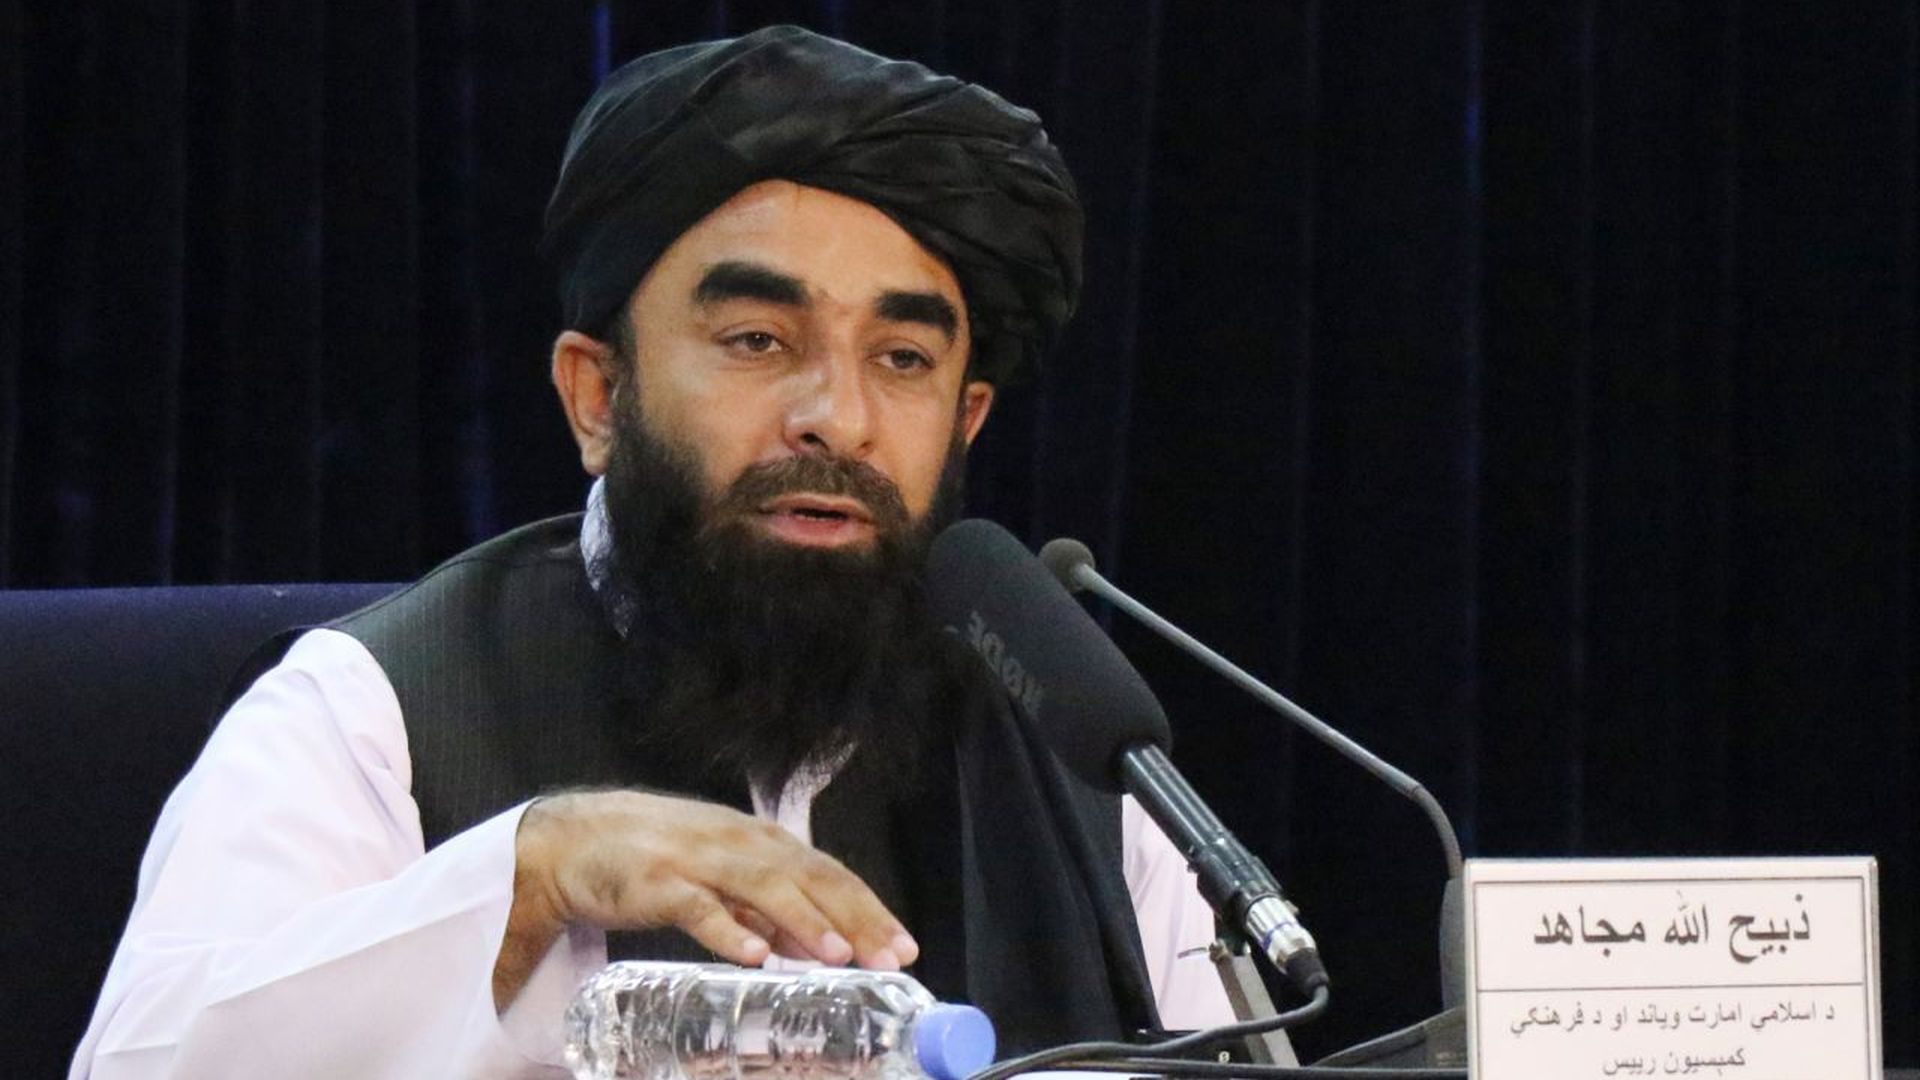 Taliban spokesperson Zabihullah Mujahid is seen holding a press conference in Kabul.